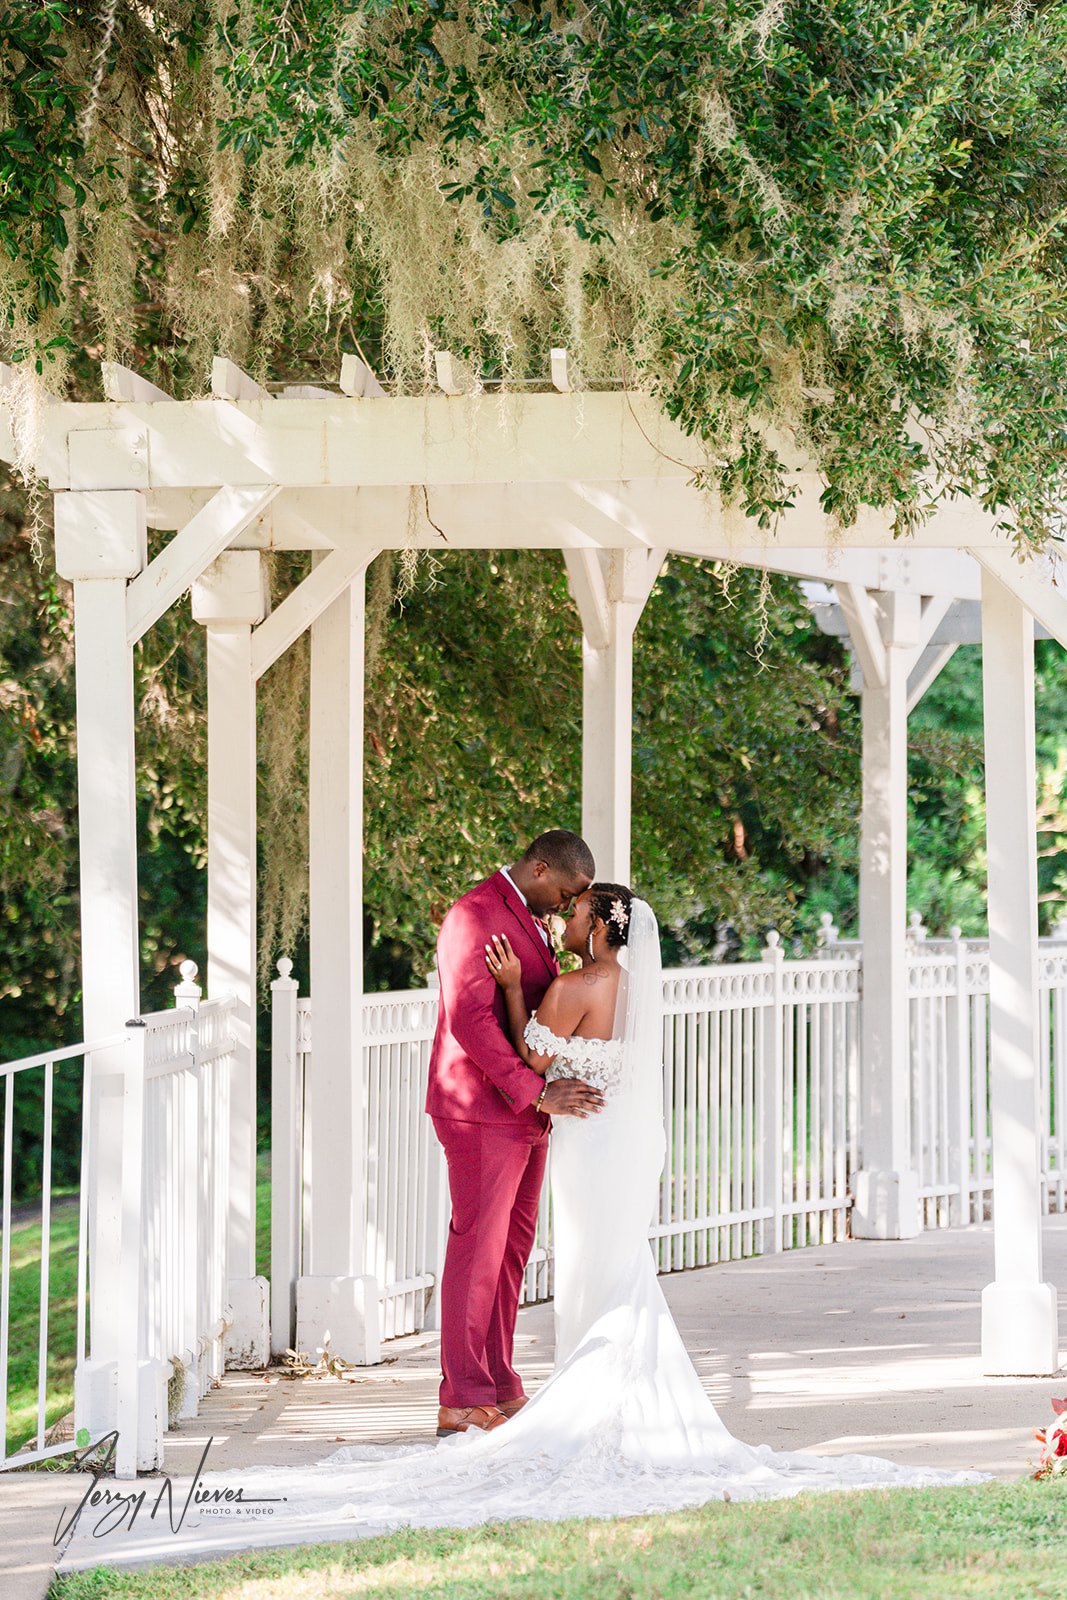 Shelby and Javon sharing a tender embrace under the garden walkway at Lake Mary Event Center.